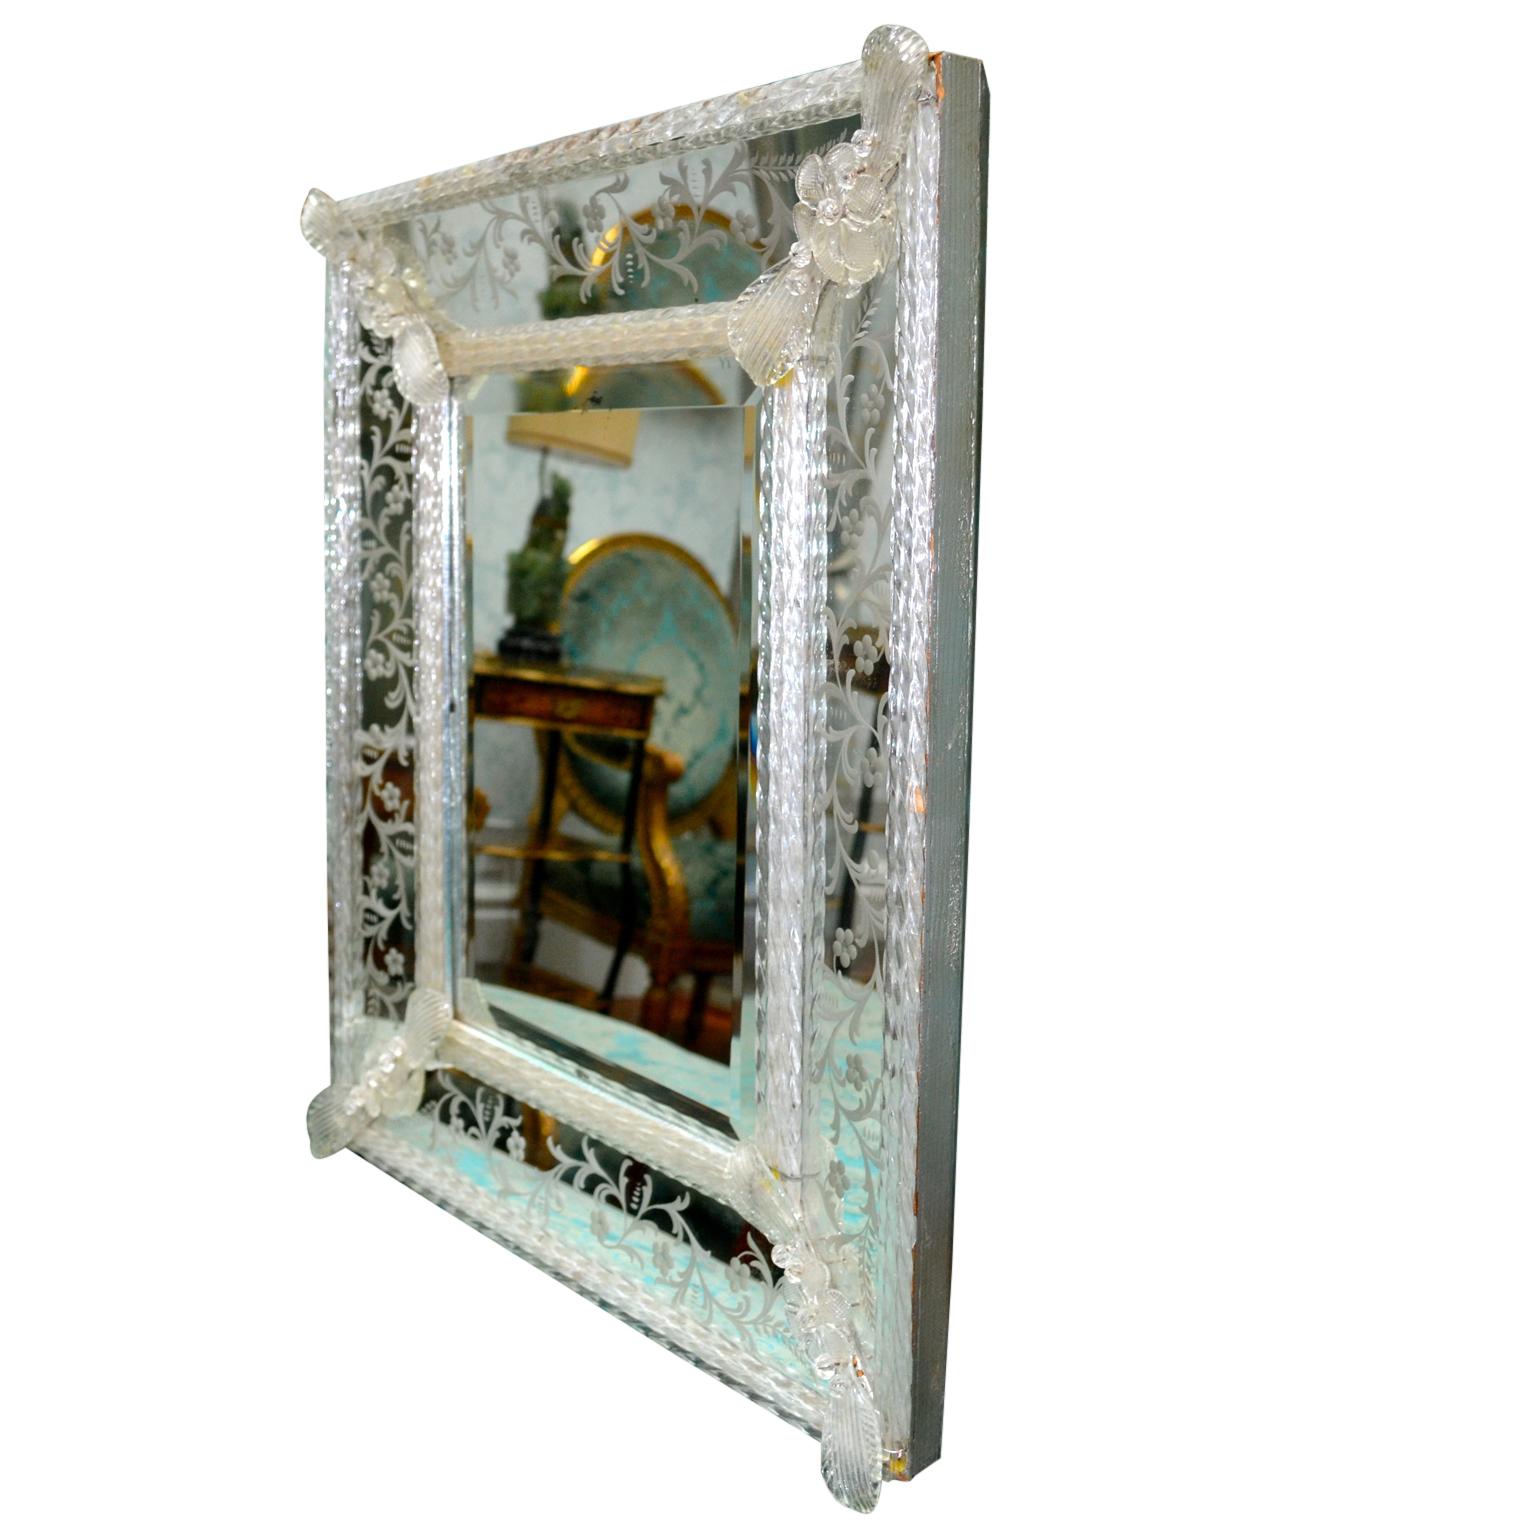 A rectangular ‘cushion’ style Venetian mirror; the four sloped sides around the beveled mirror have all-over floral engraving, all sections framed with clear crystal rods.

 